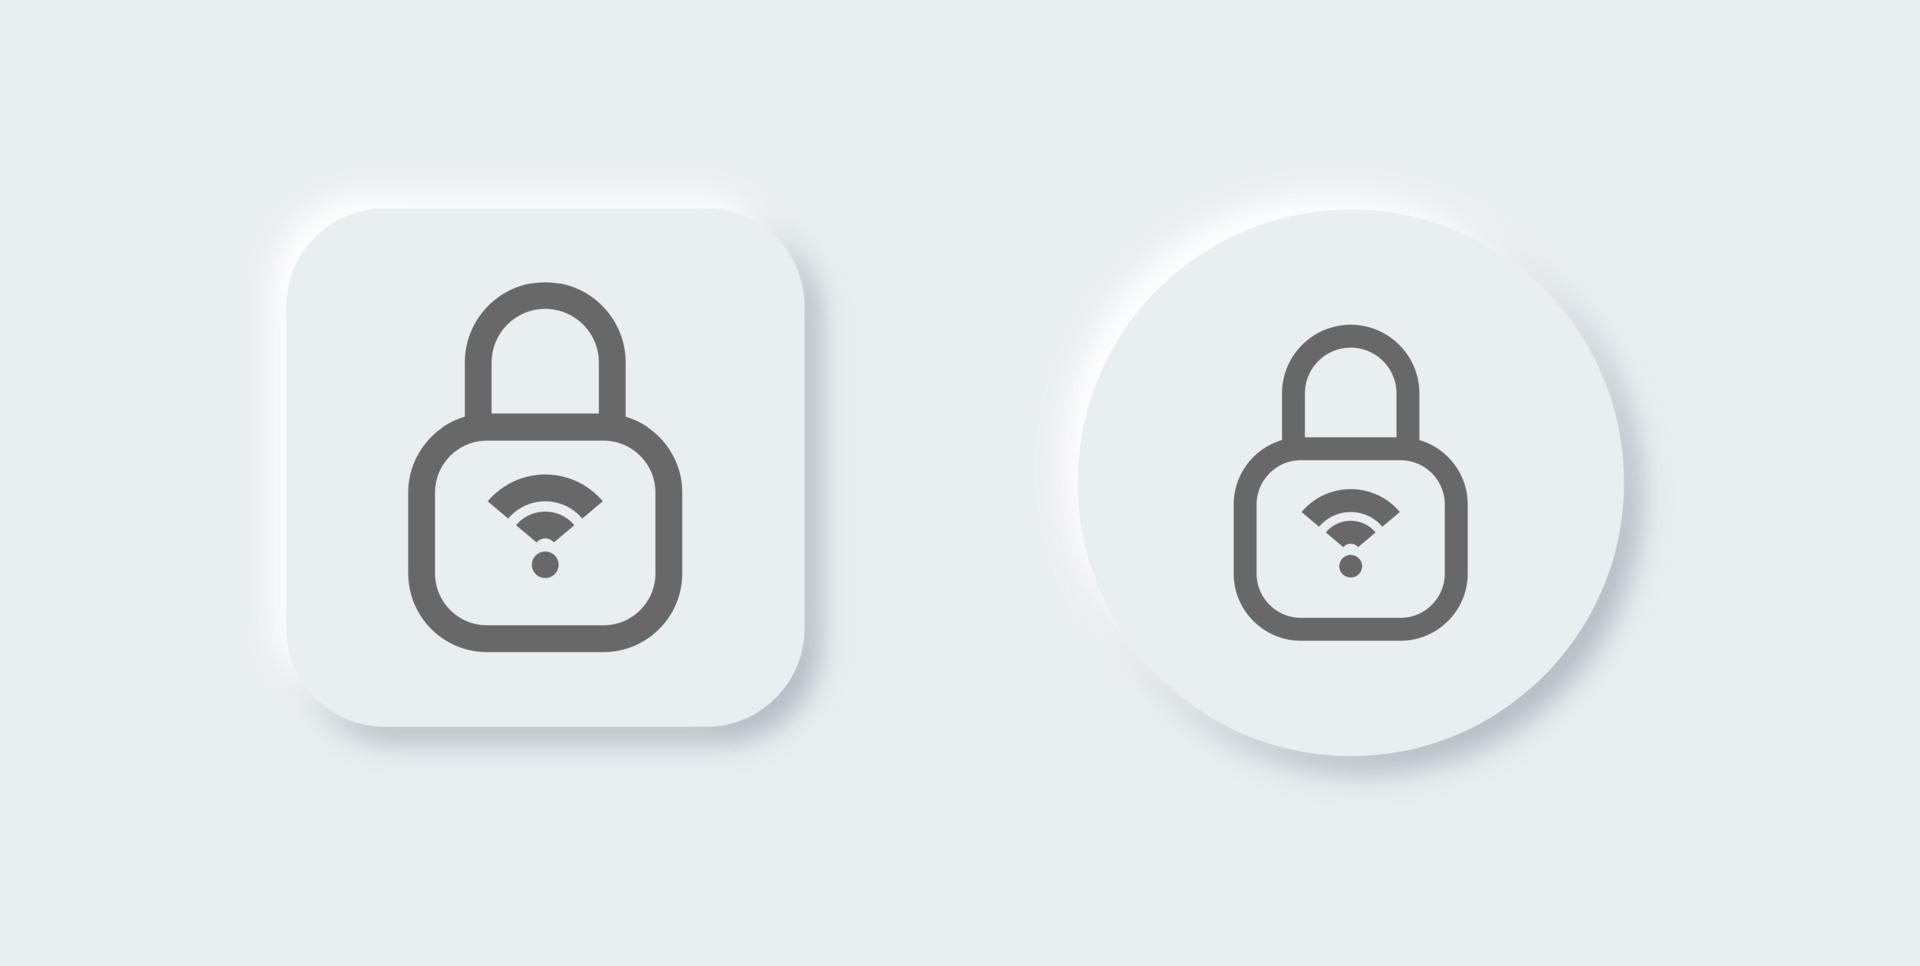 Padlock line icon in neomorphic design style. Security signs vector illustration.